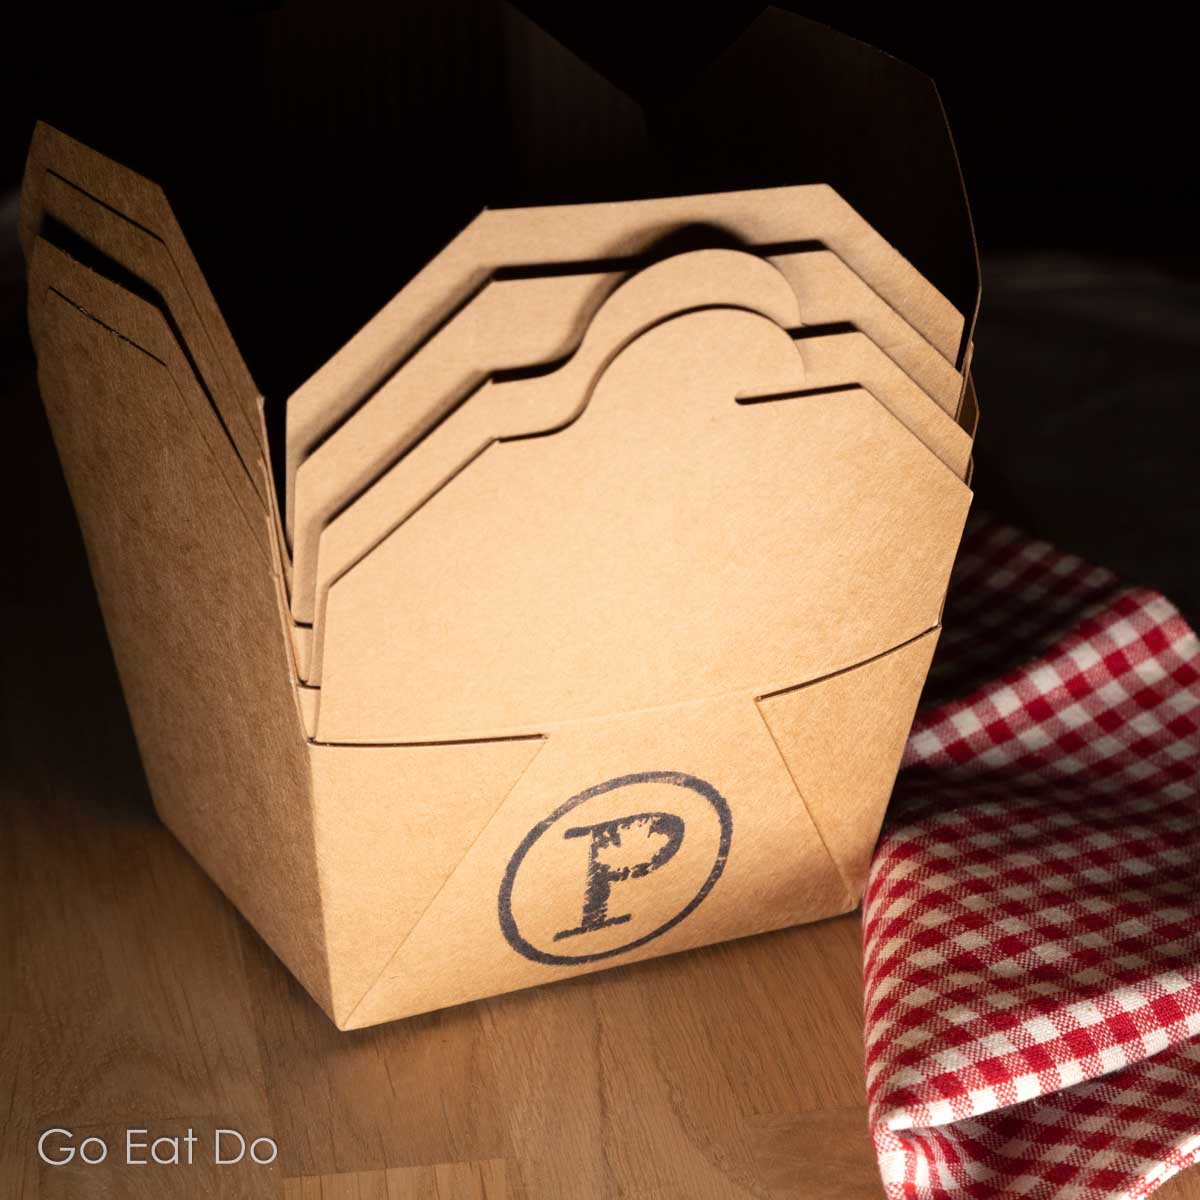 Boxes from The Poutinerie, which serves Canadian poutine in London, England